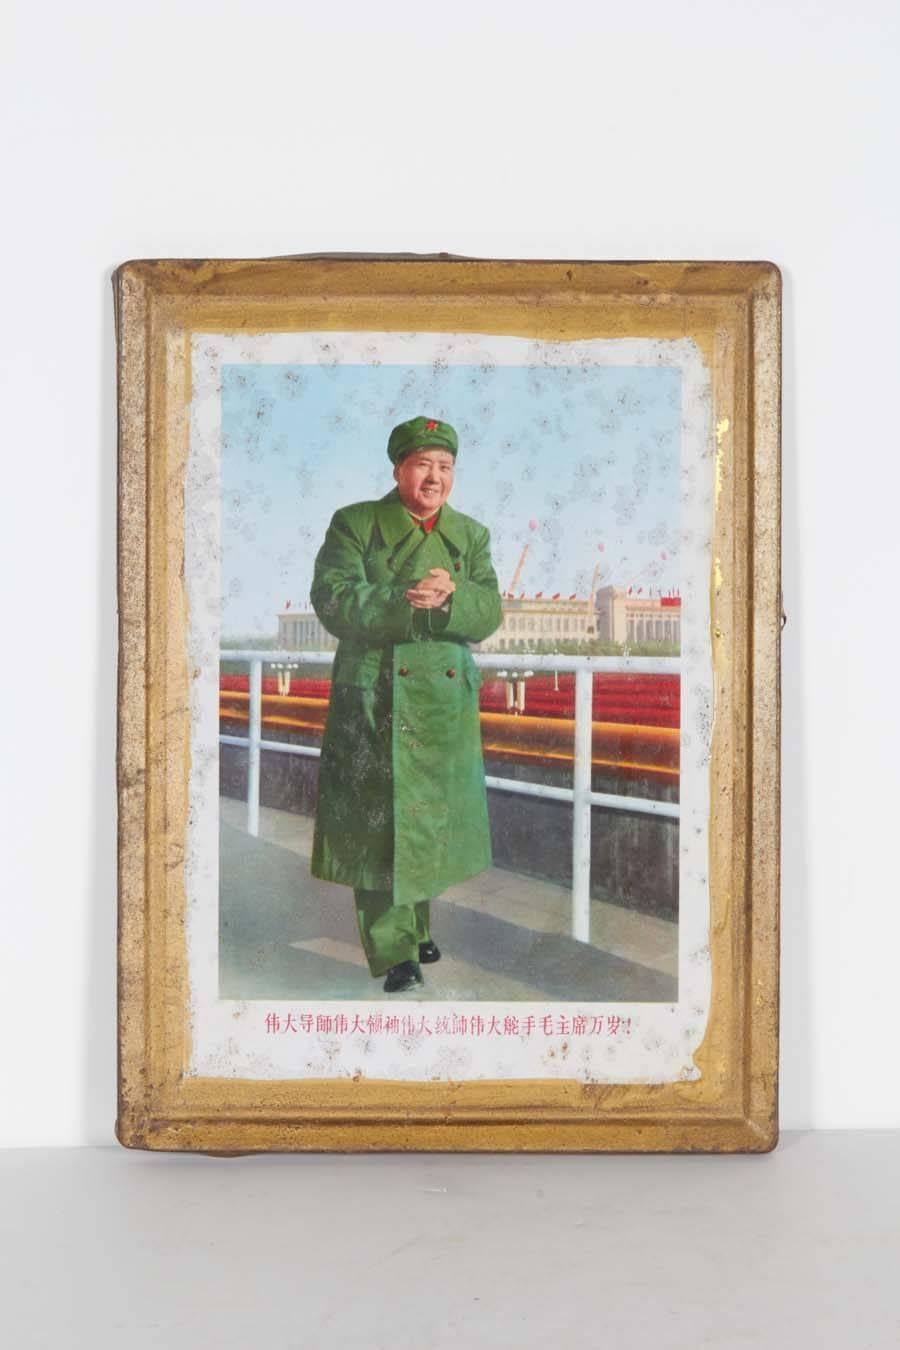 Set of Mao Cultural Revolution Portraits on Tin In Good Condition For Sale In New York, NY